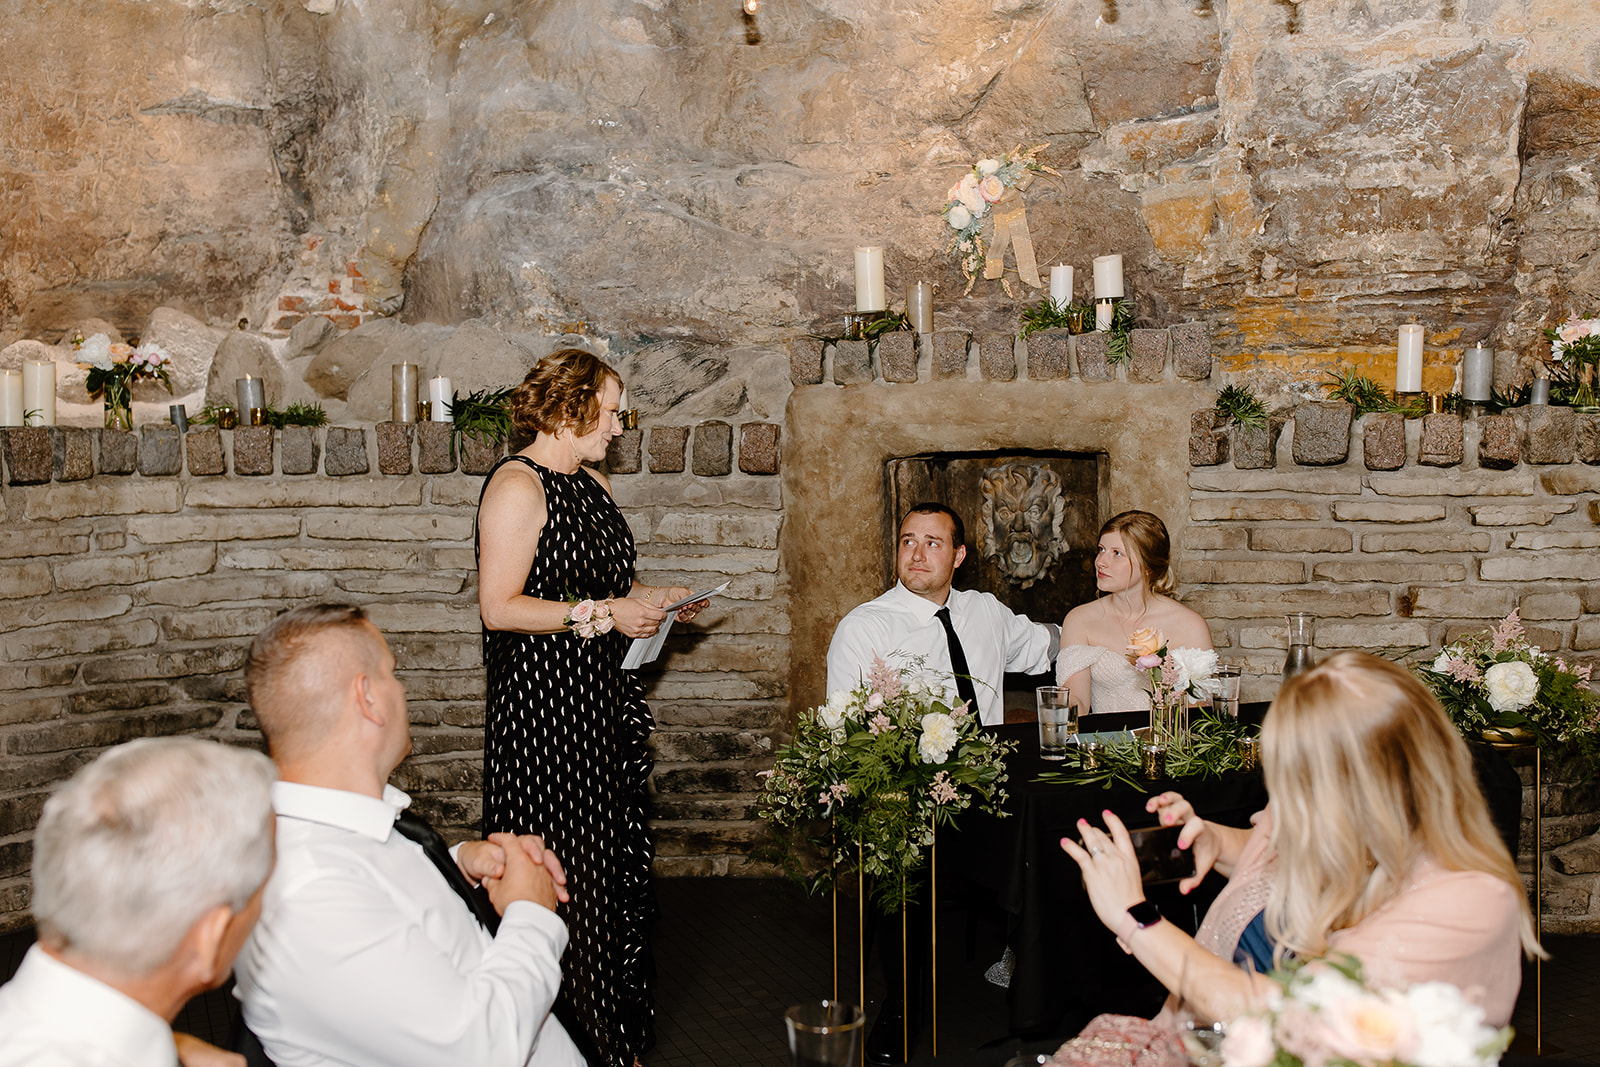 Bride and groom listen to speeches given at their wedding reception in a cave 